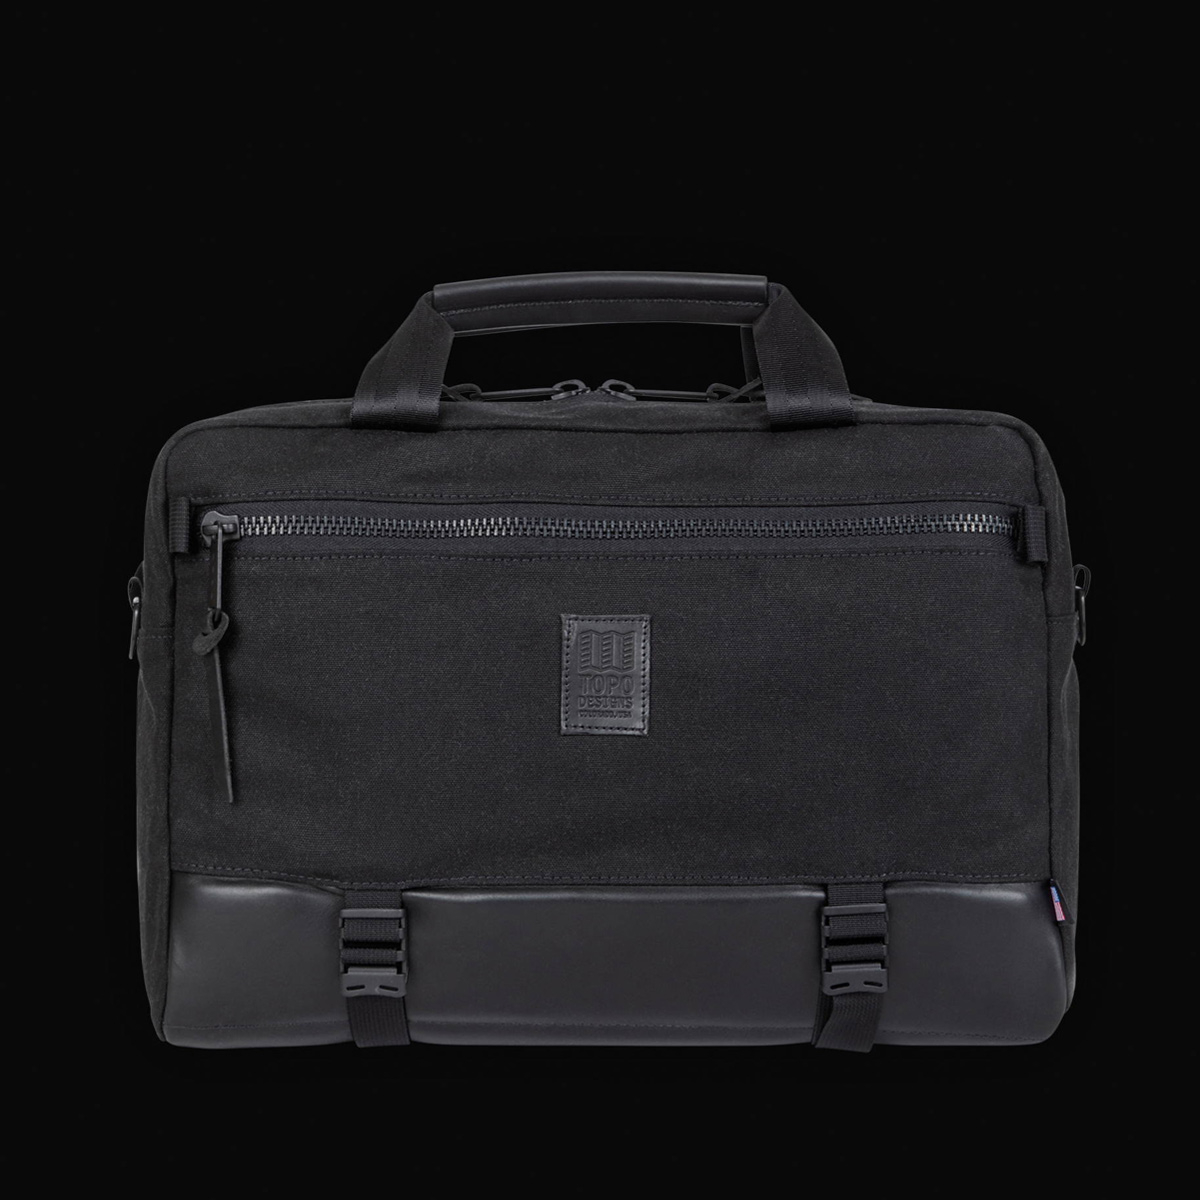 Topo Designs Commuter Briefcase Heritige Black Canvas/Black Leather, perfect for everyday carry